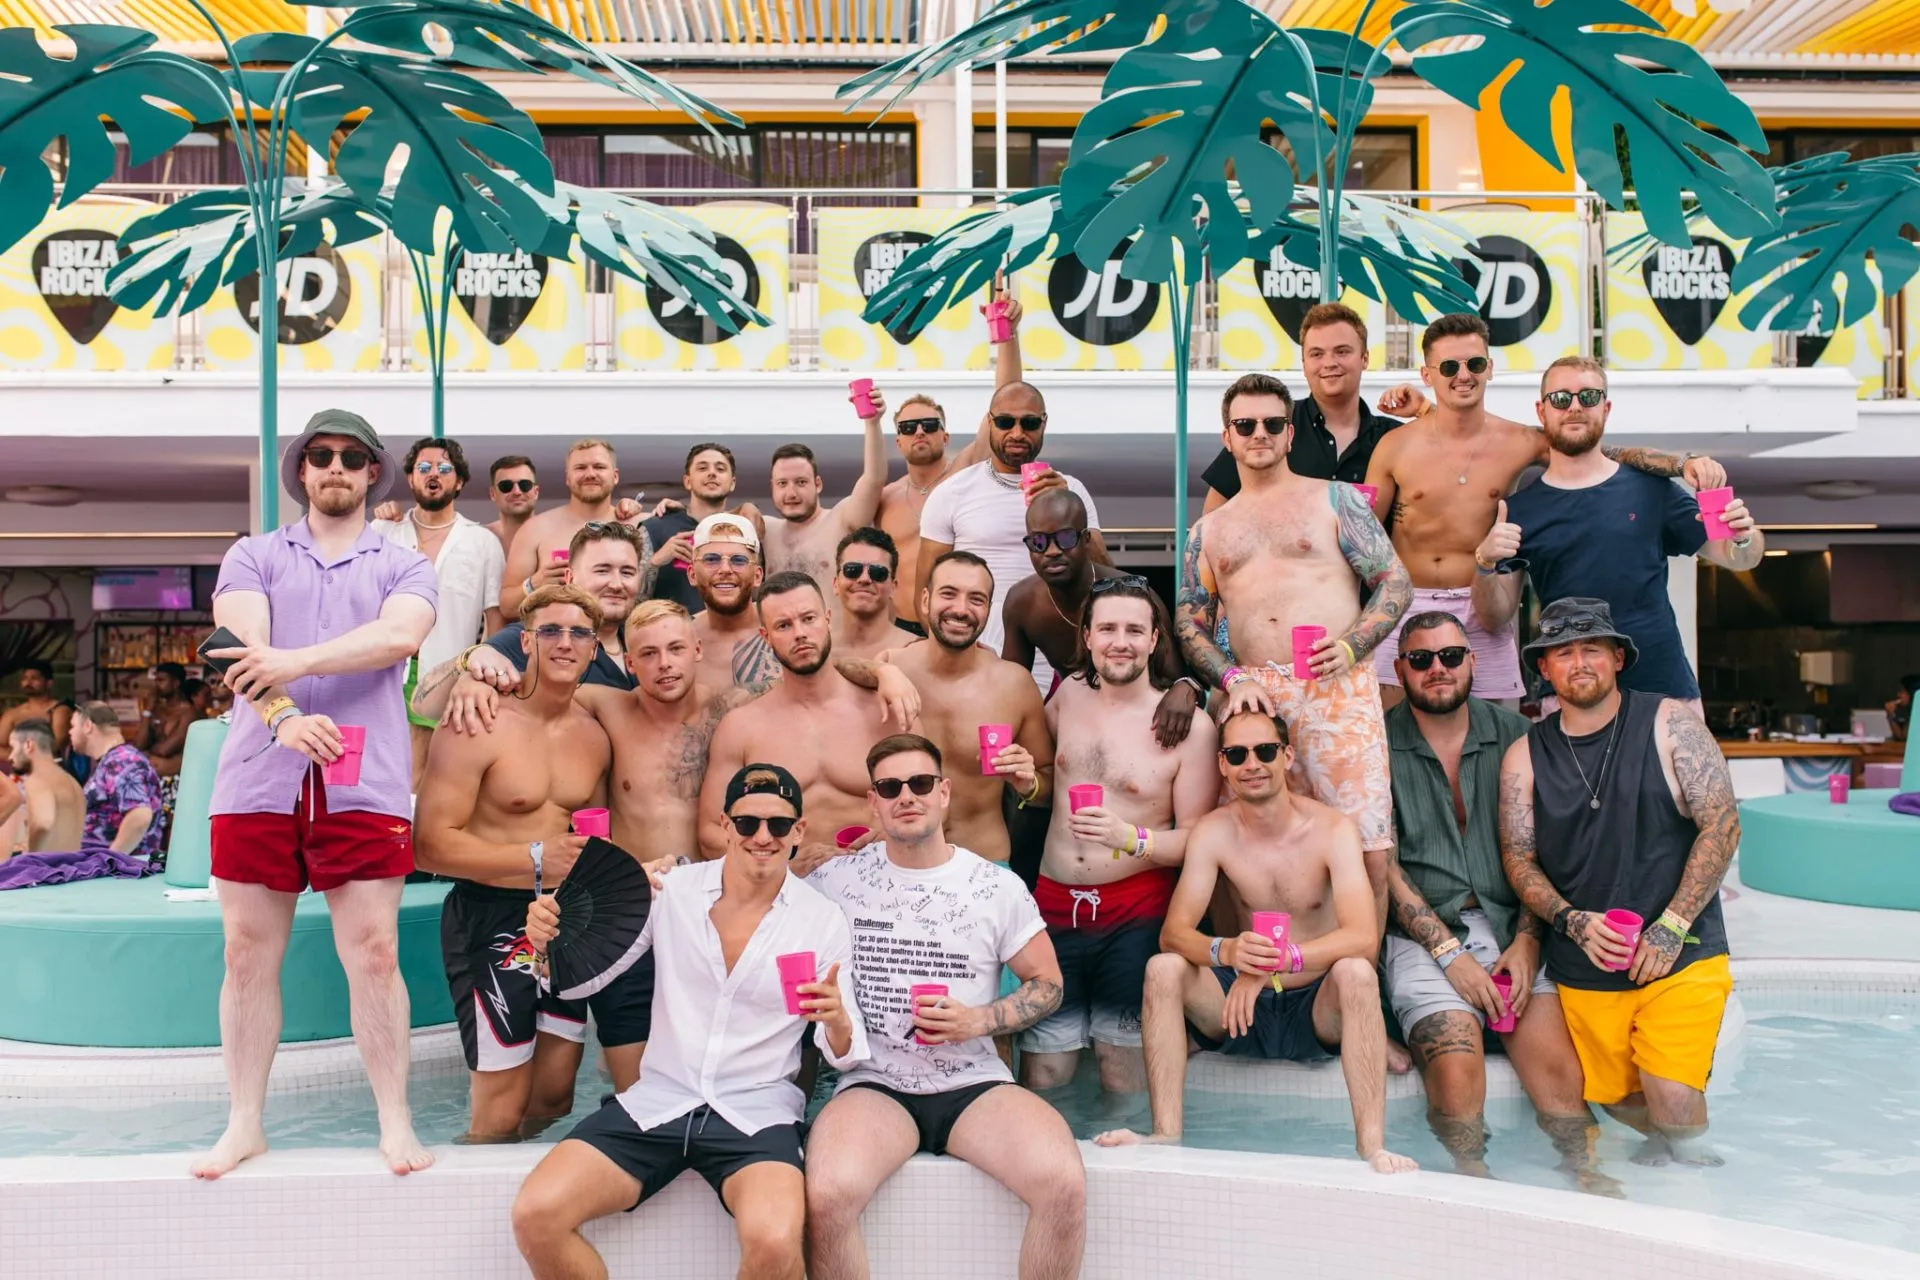 Ibiza Rocks Group Bookings | Stag & Hen Do | Birthday